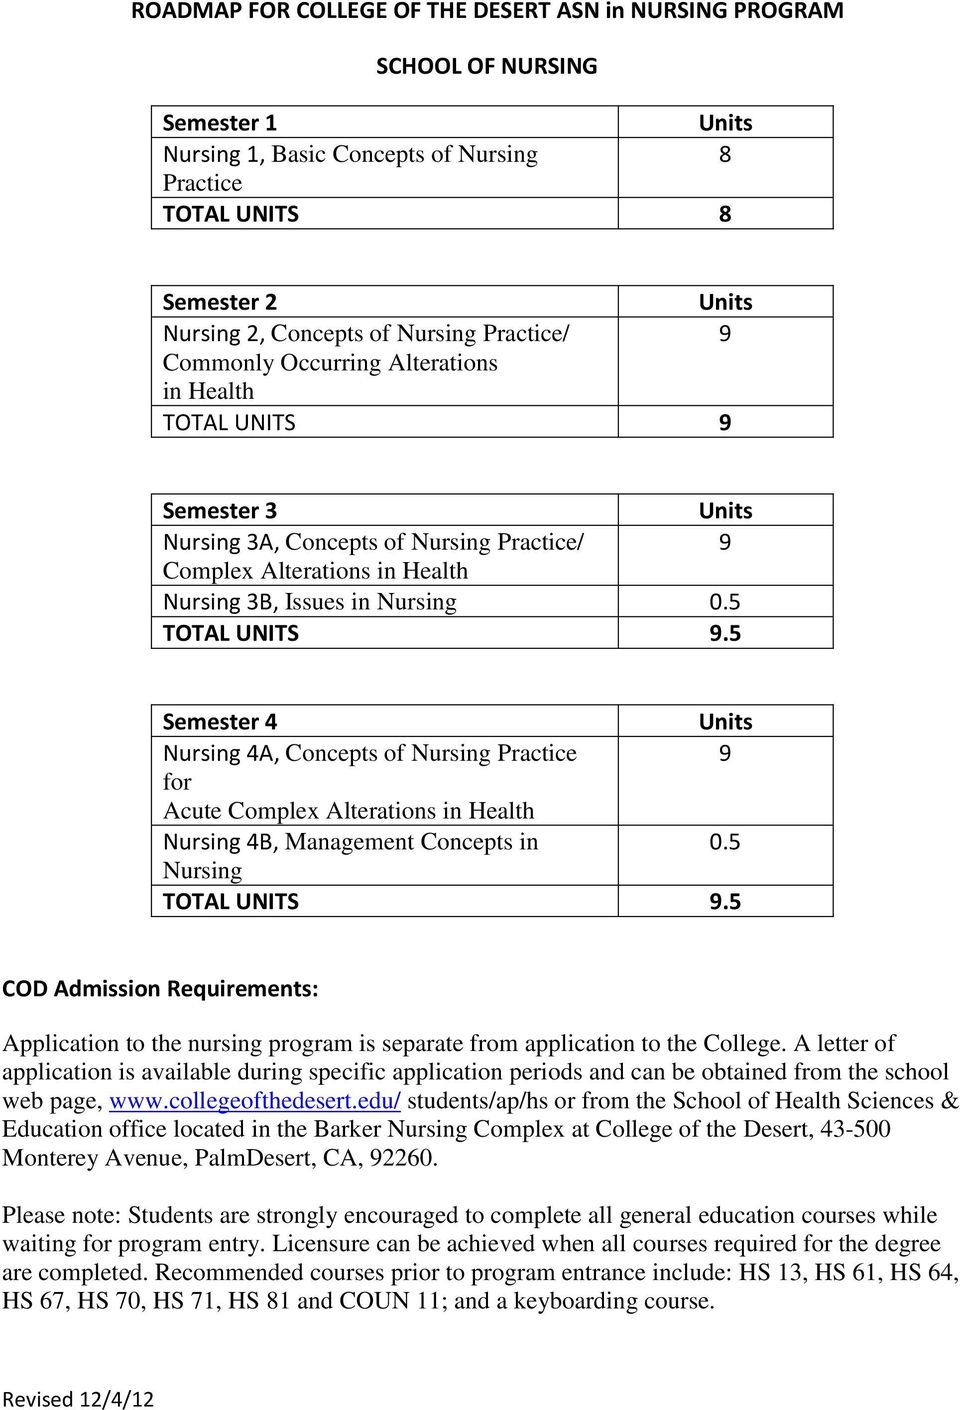 5 Semester Nursing A, Concepts of Nursing Practice 9 for Acute Complex Alterations in Health Nursing B, Management Concepts in 0.5 Nursing TOTAL UNITS 9.